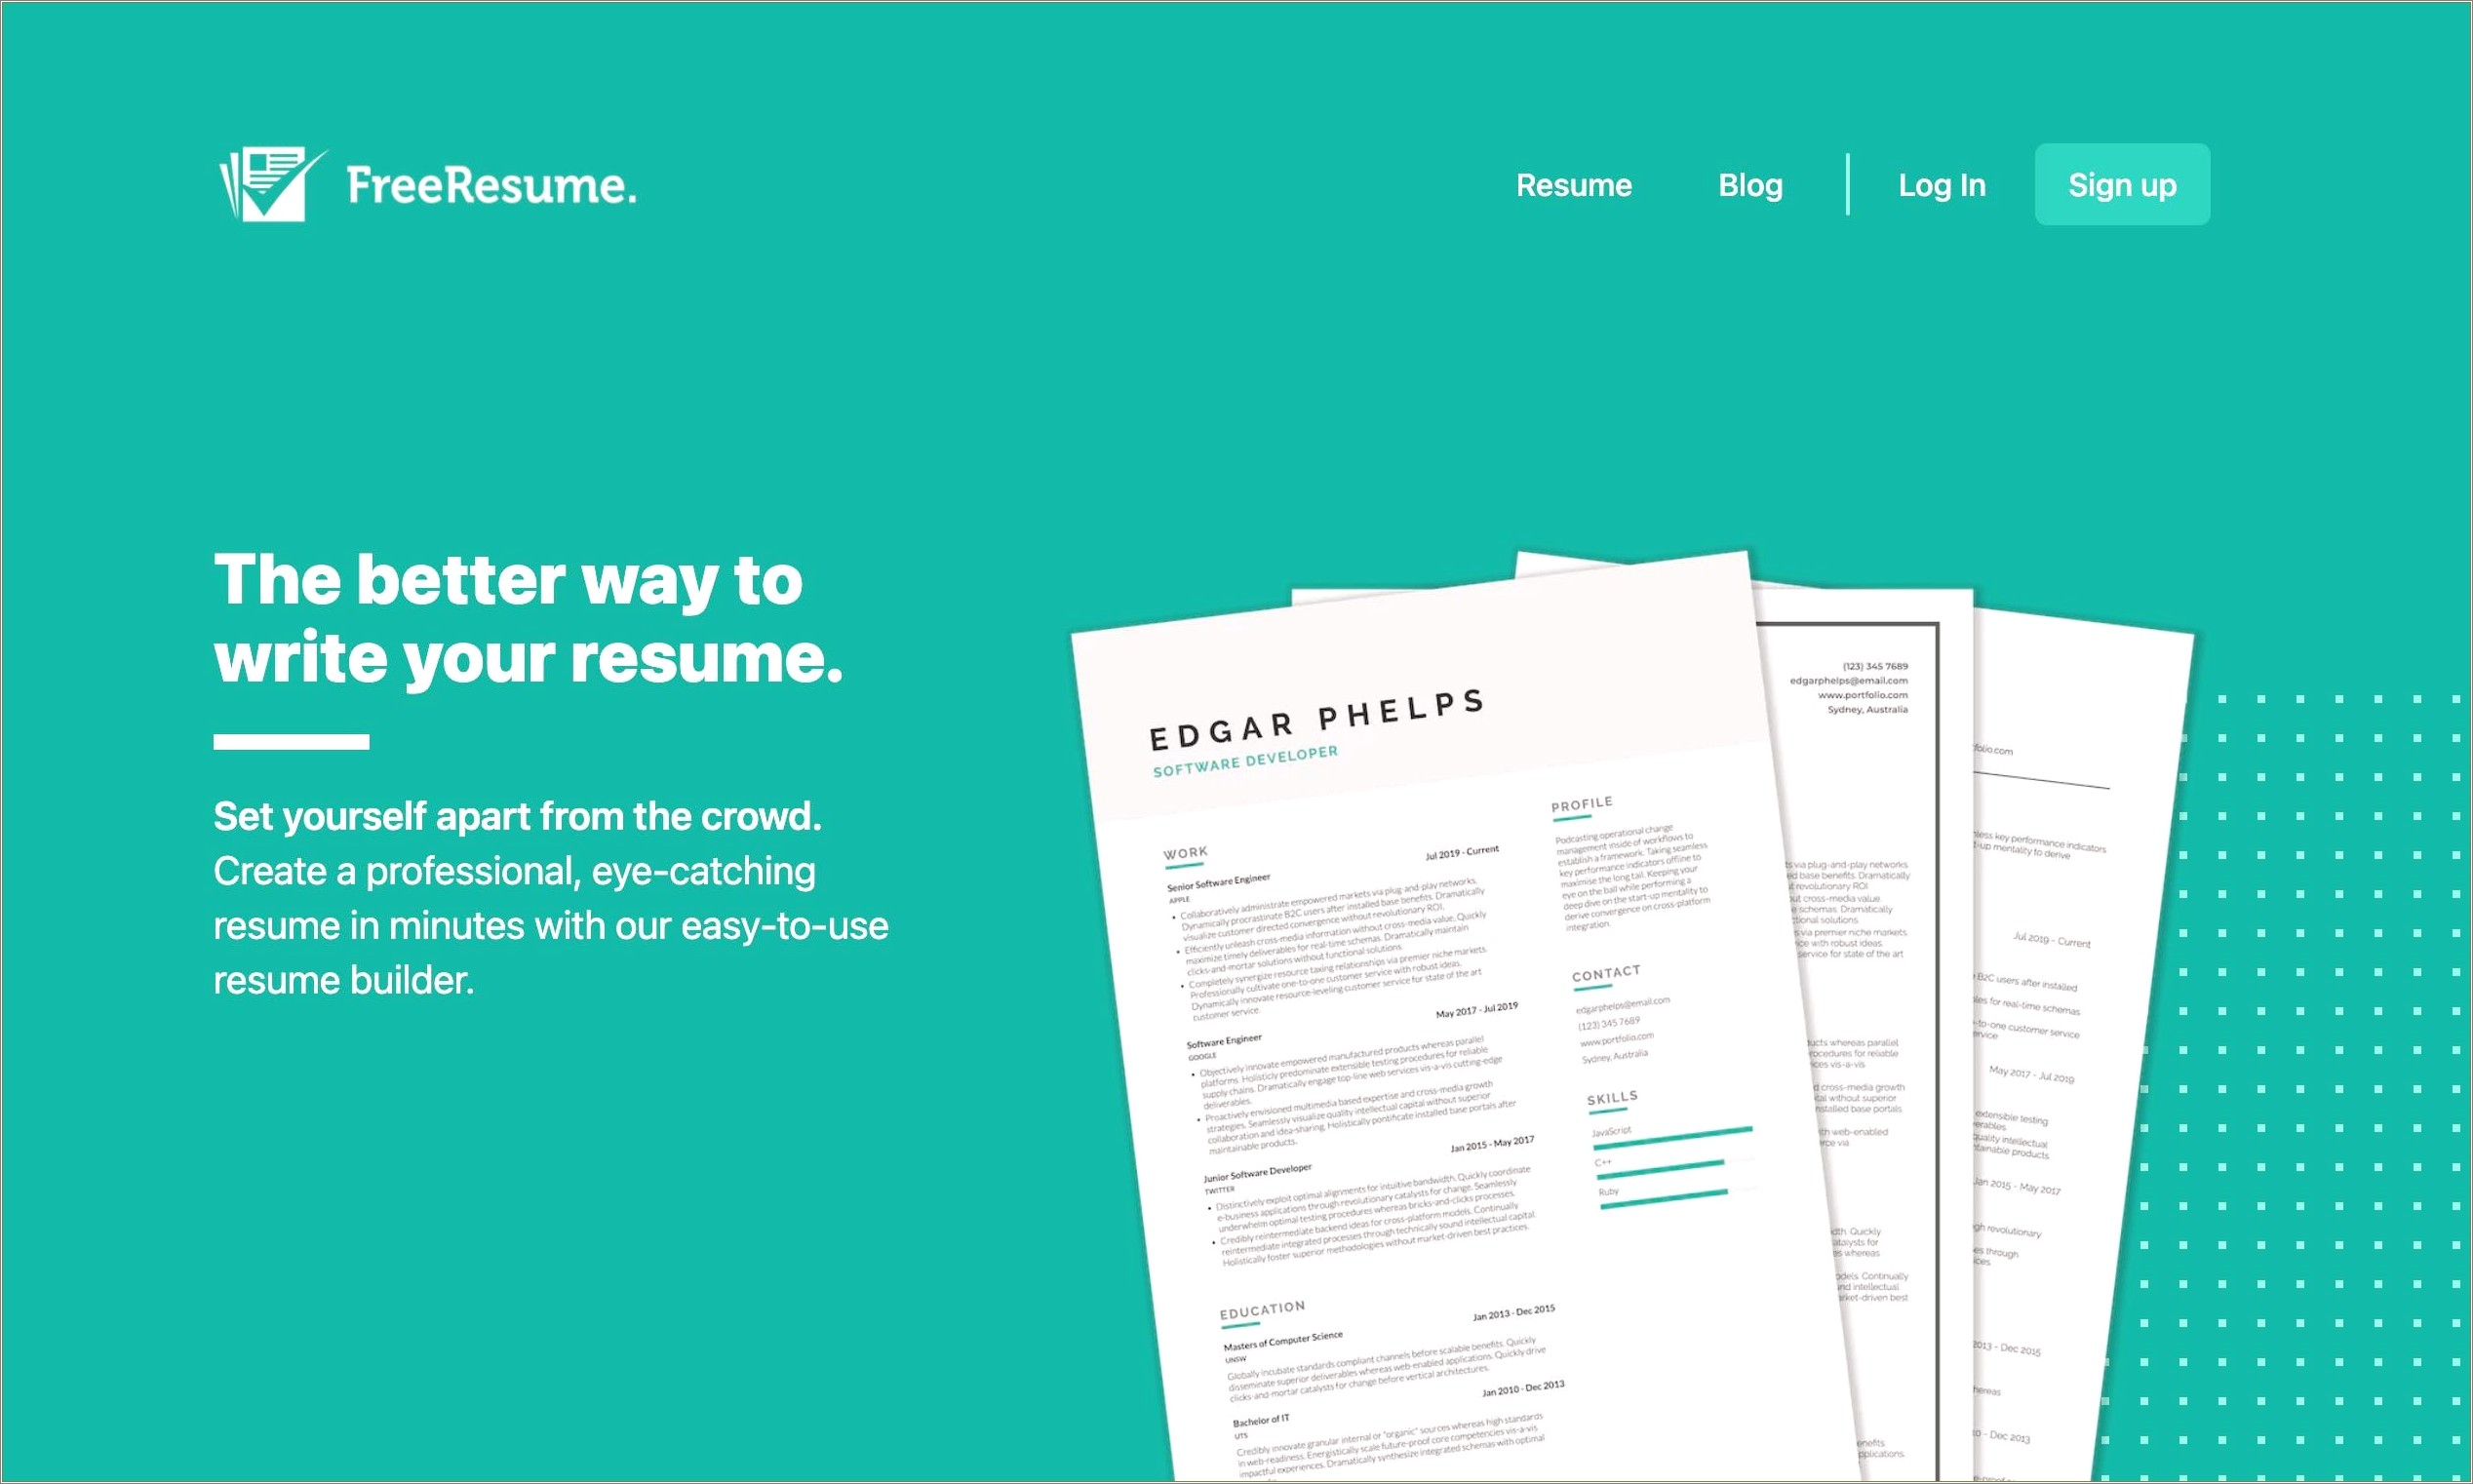 Any Actual Free Resume Builders